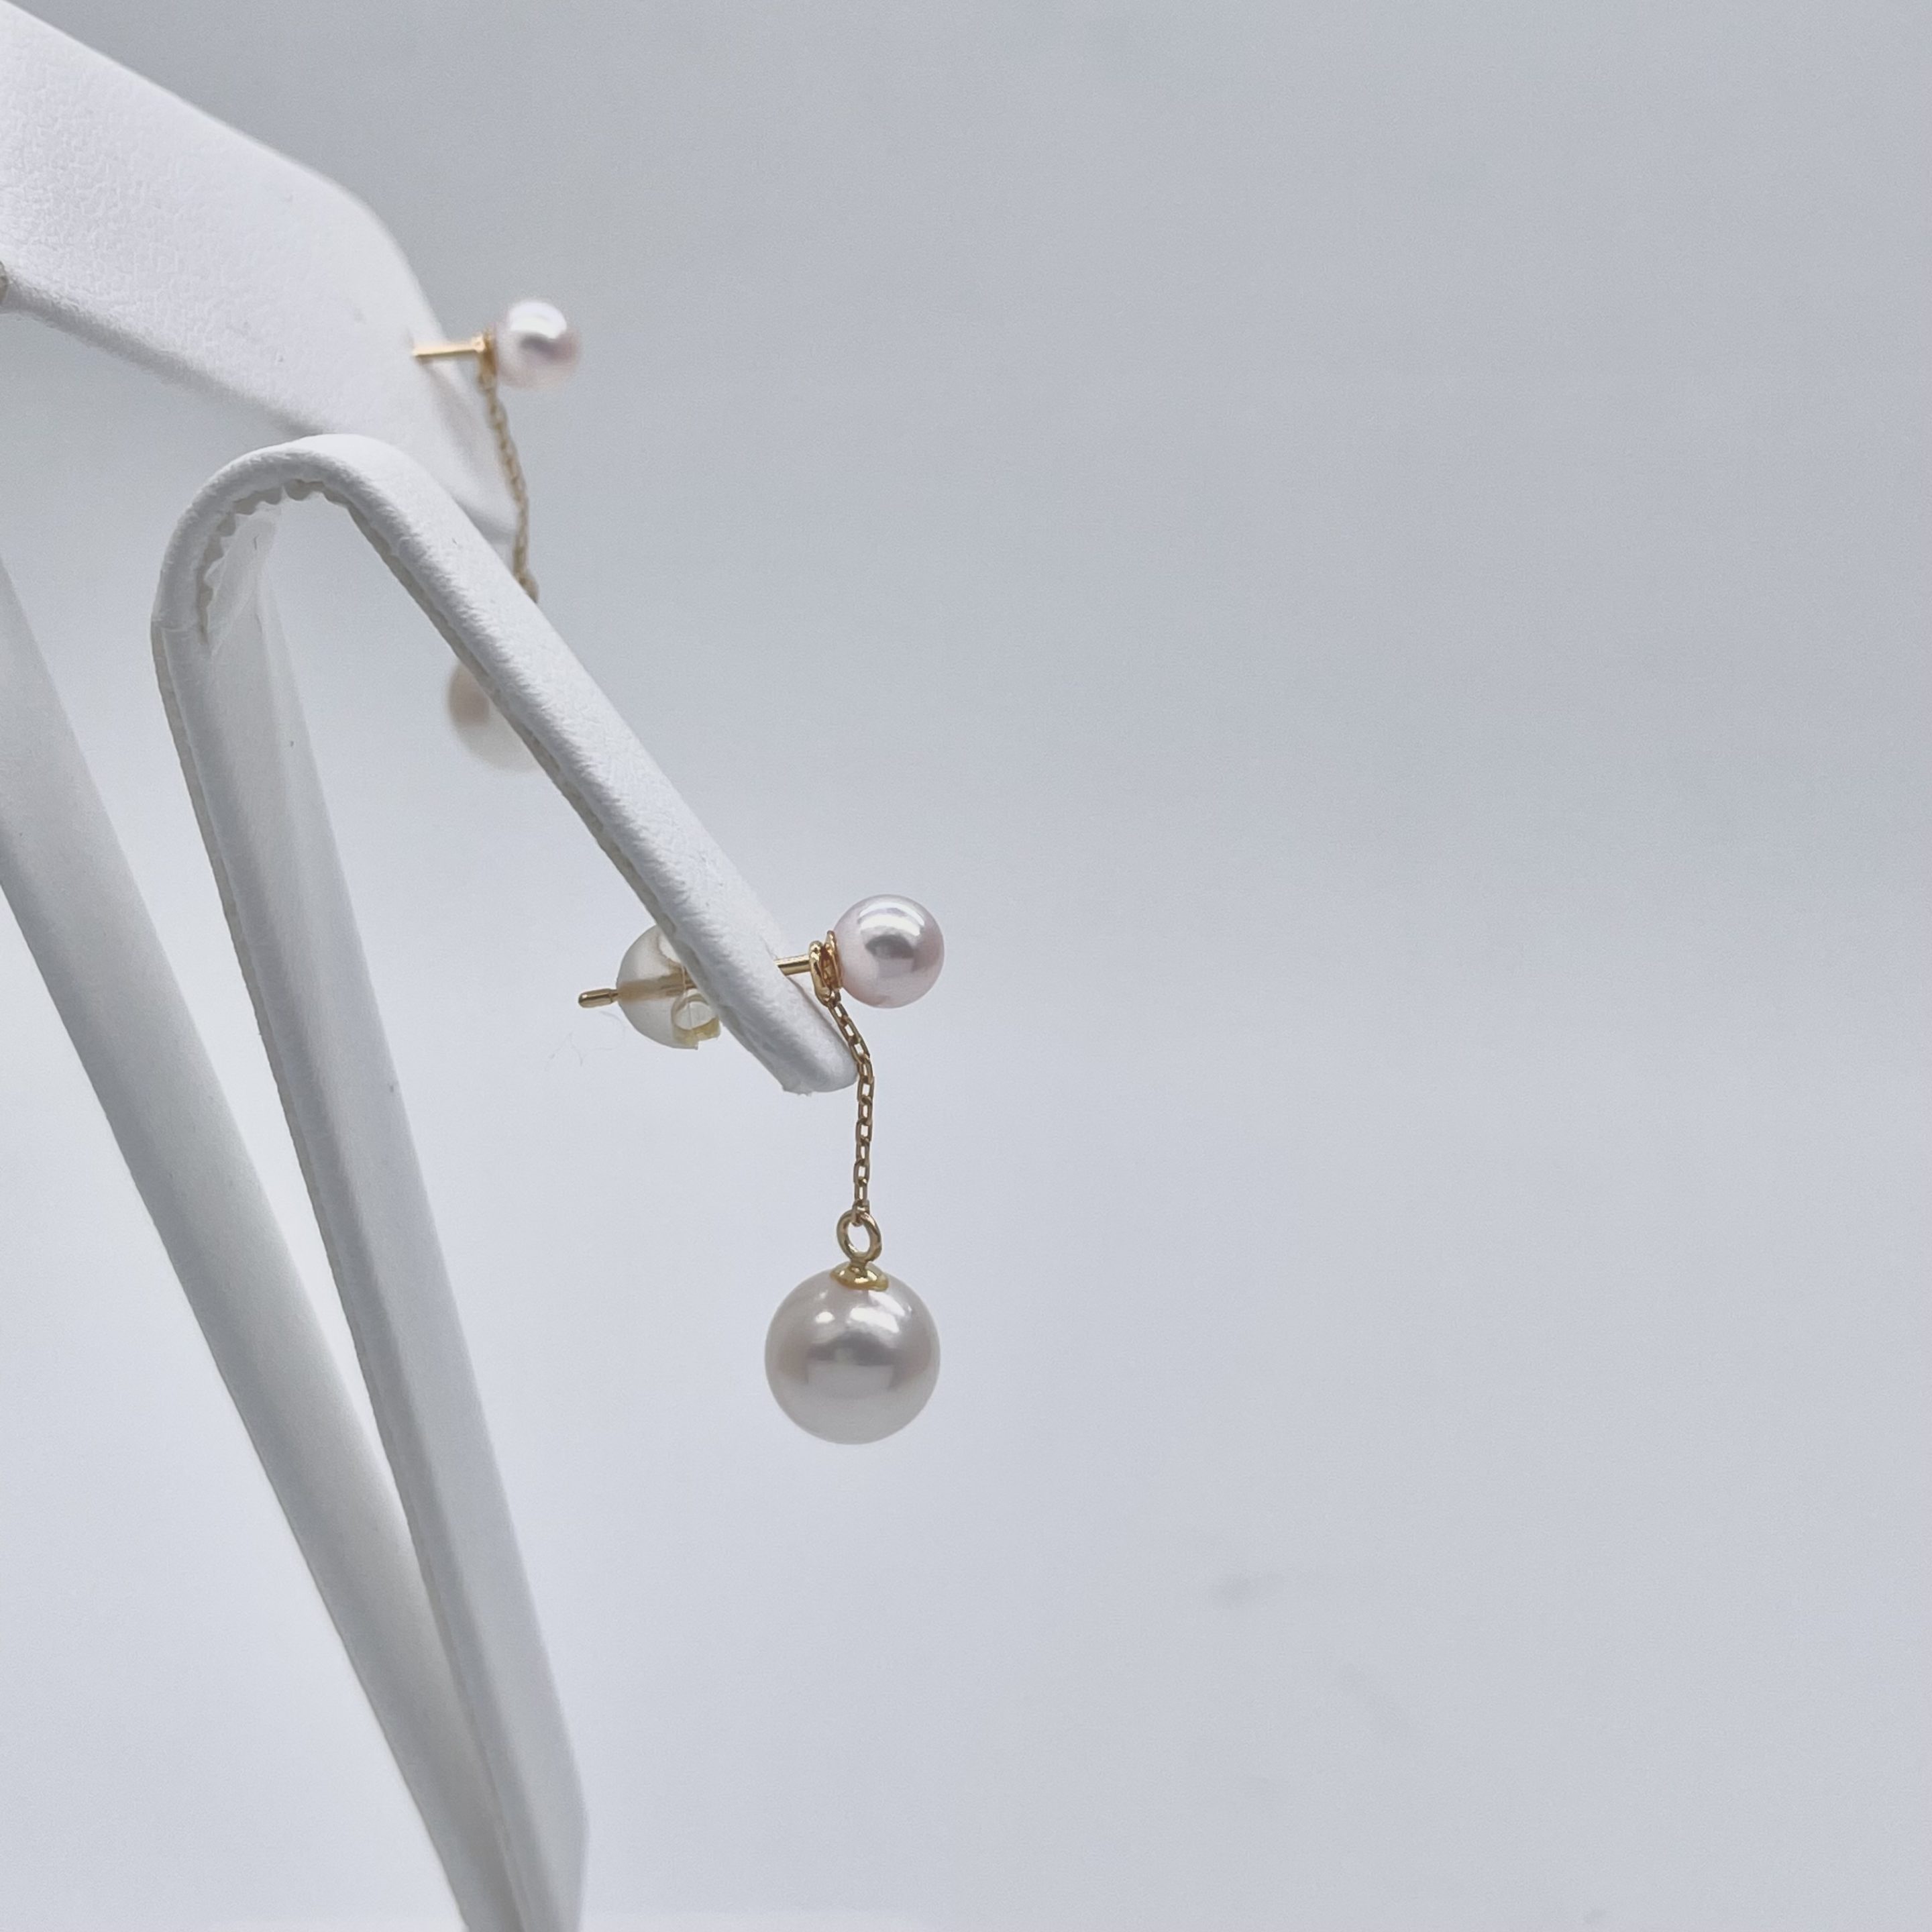 Our Amazing Pearl Falco Earrings Arrive in Singapore! So Many Ways to ...